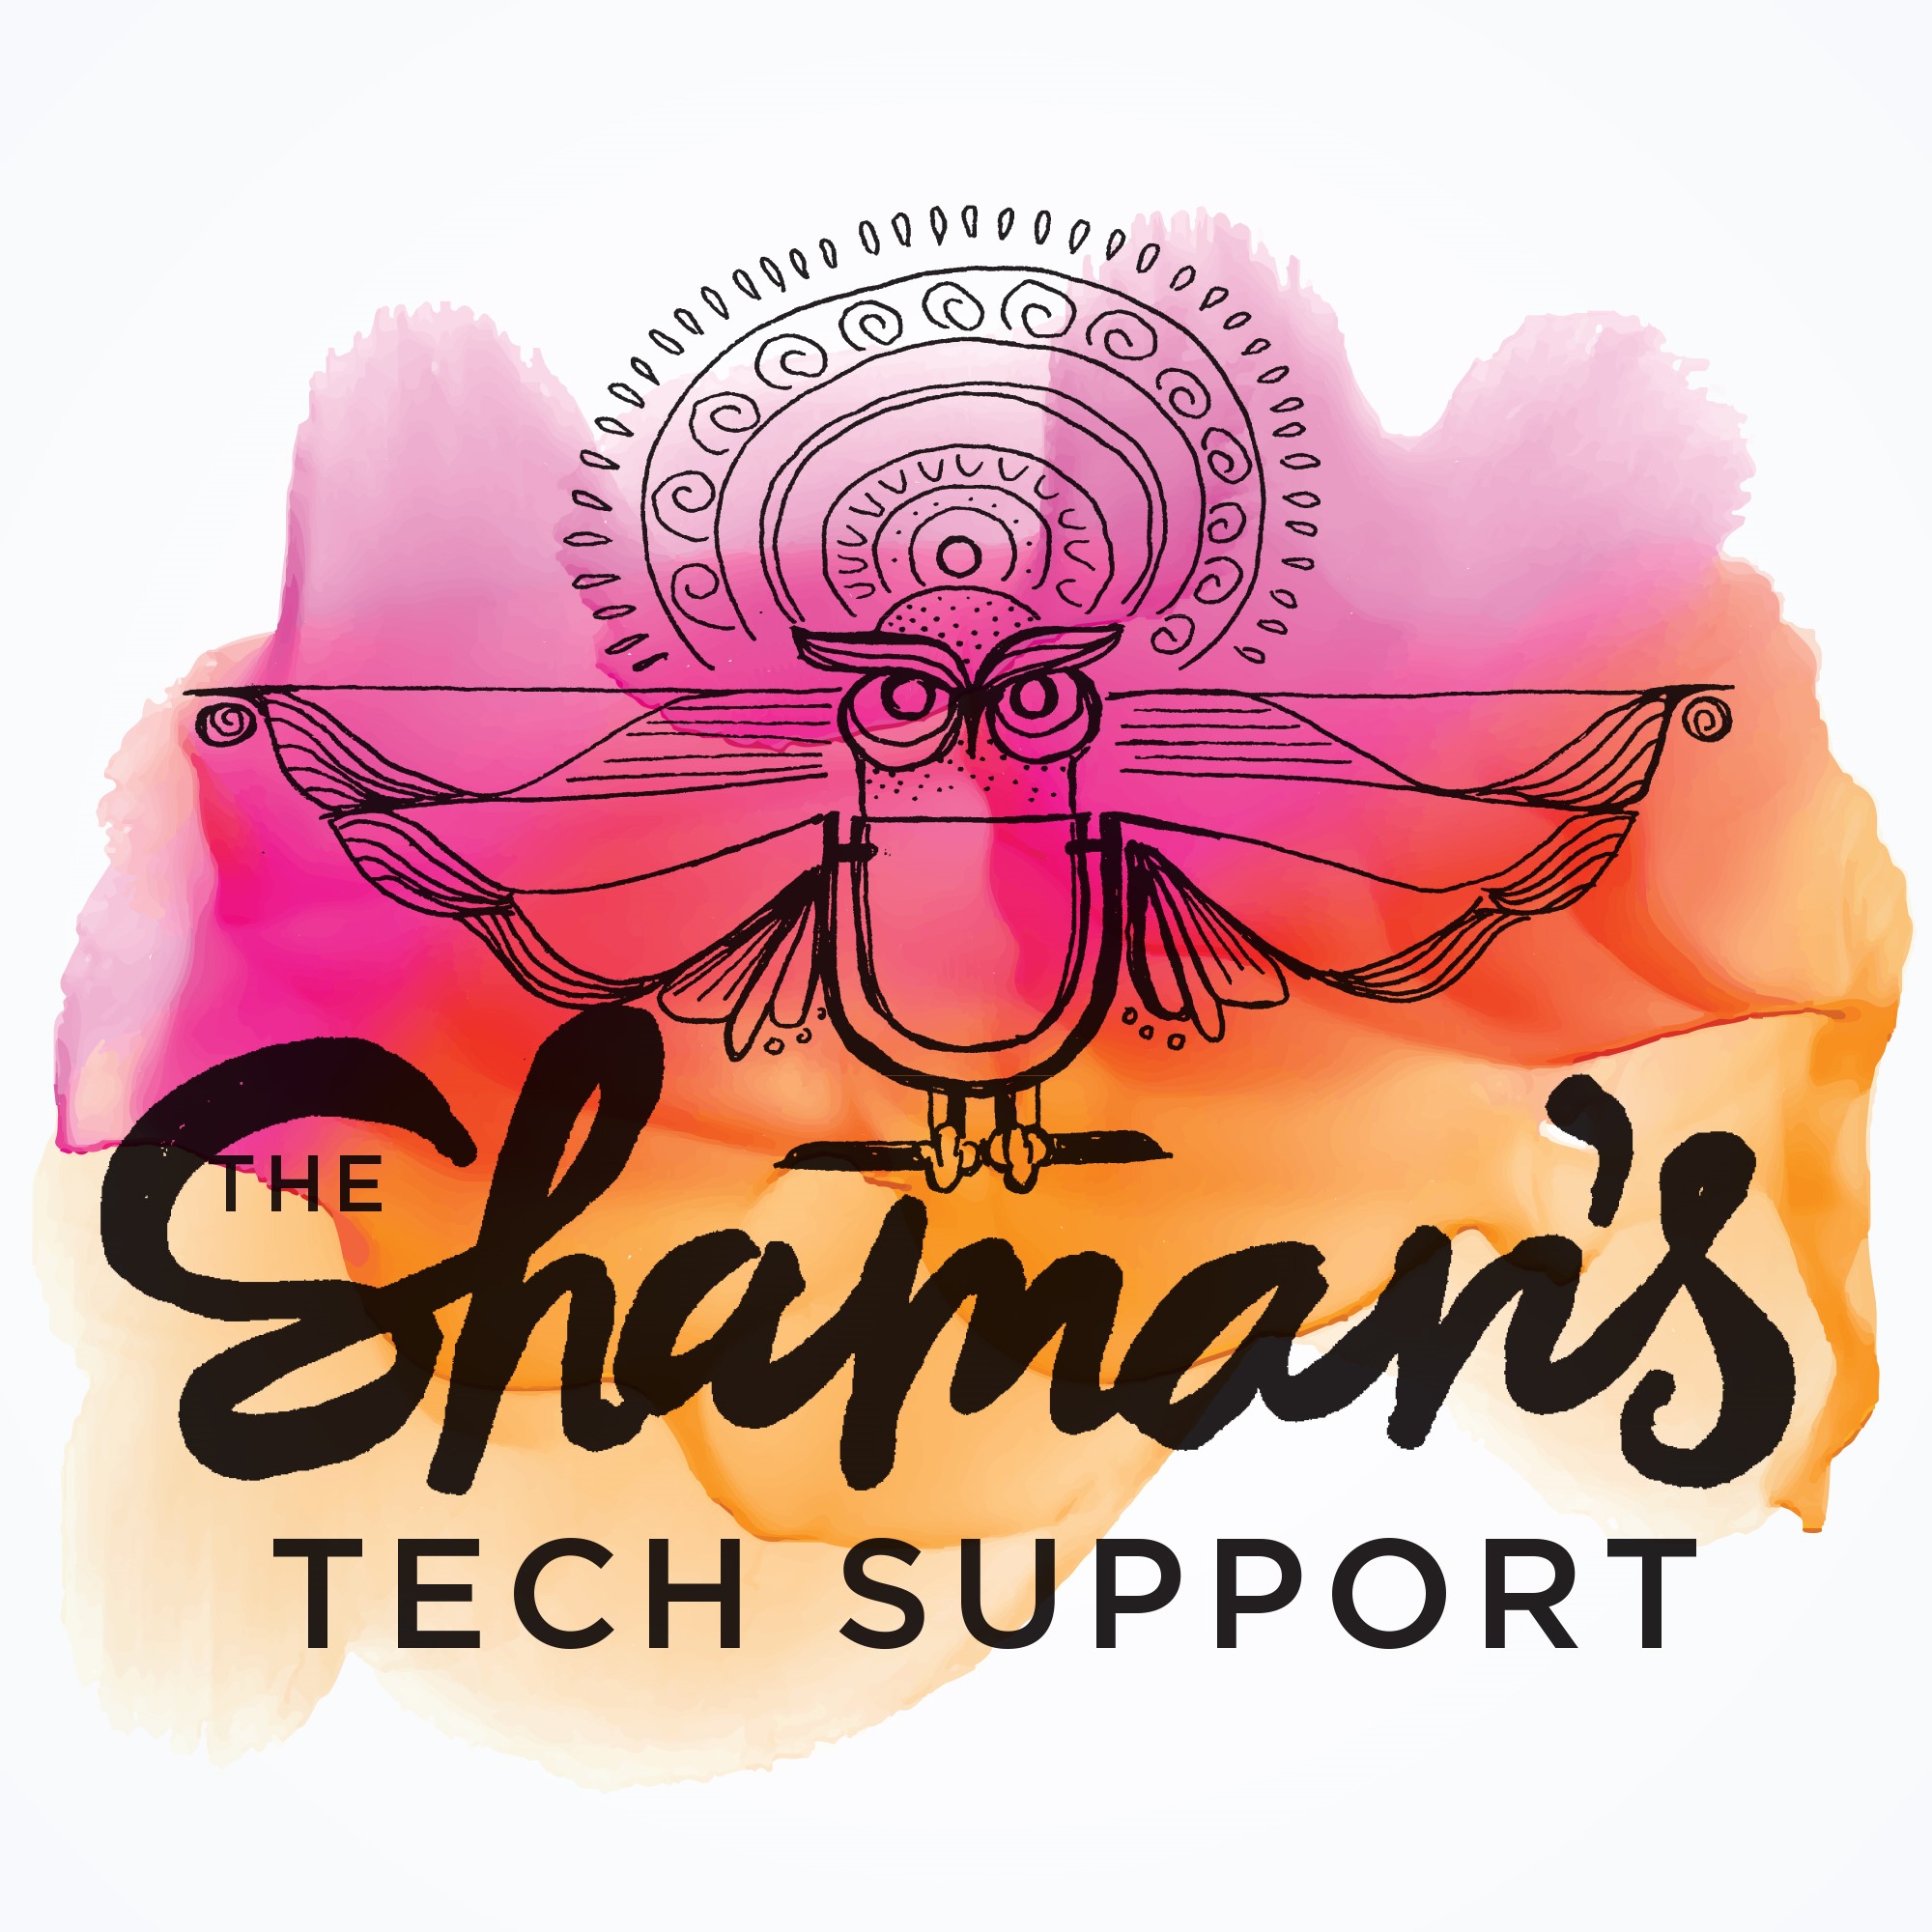 The Shaman's Tech Support